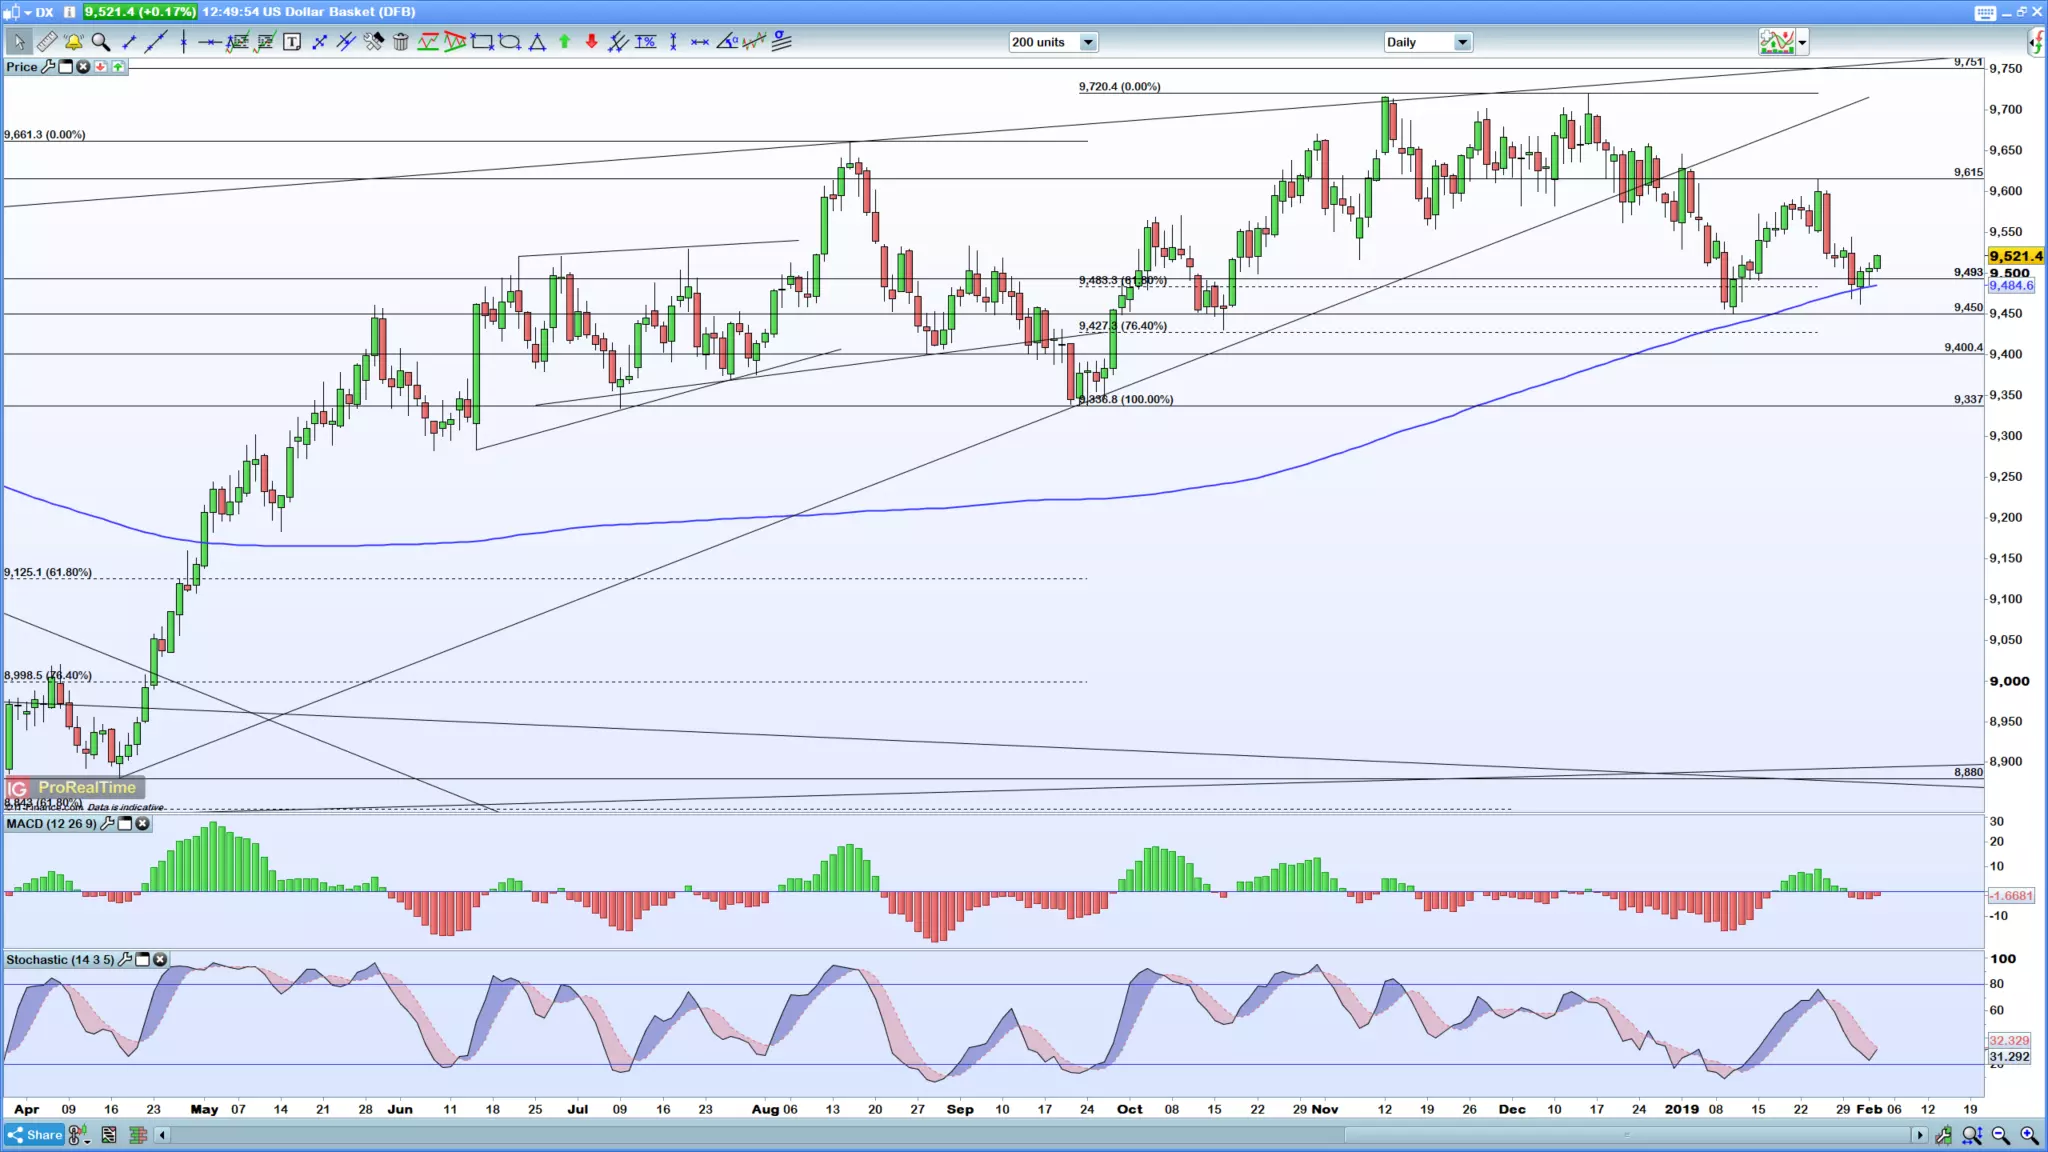 DXY daily chart